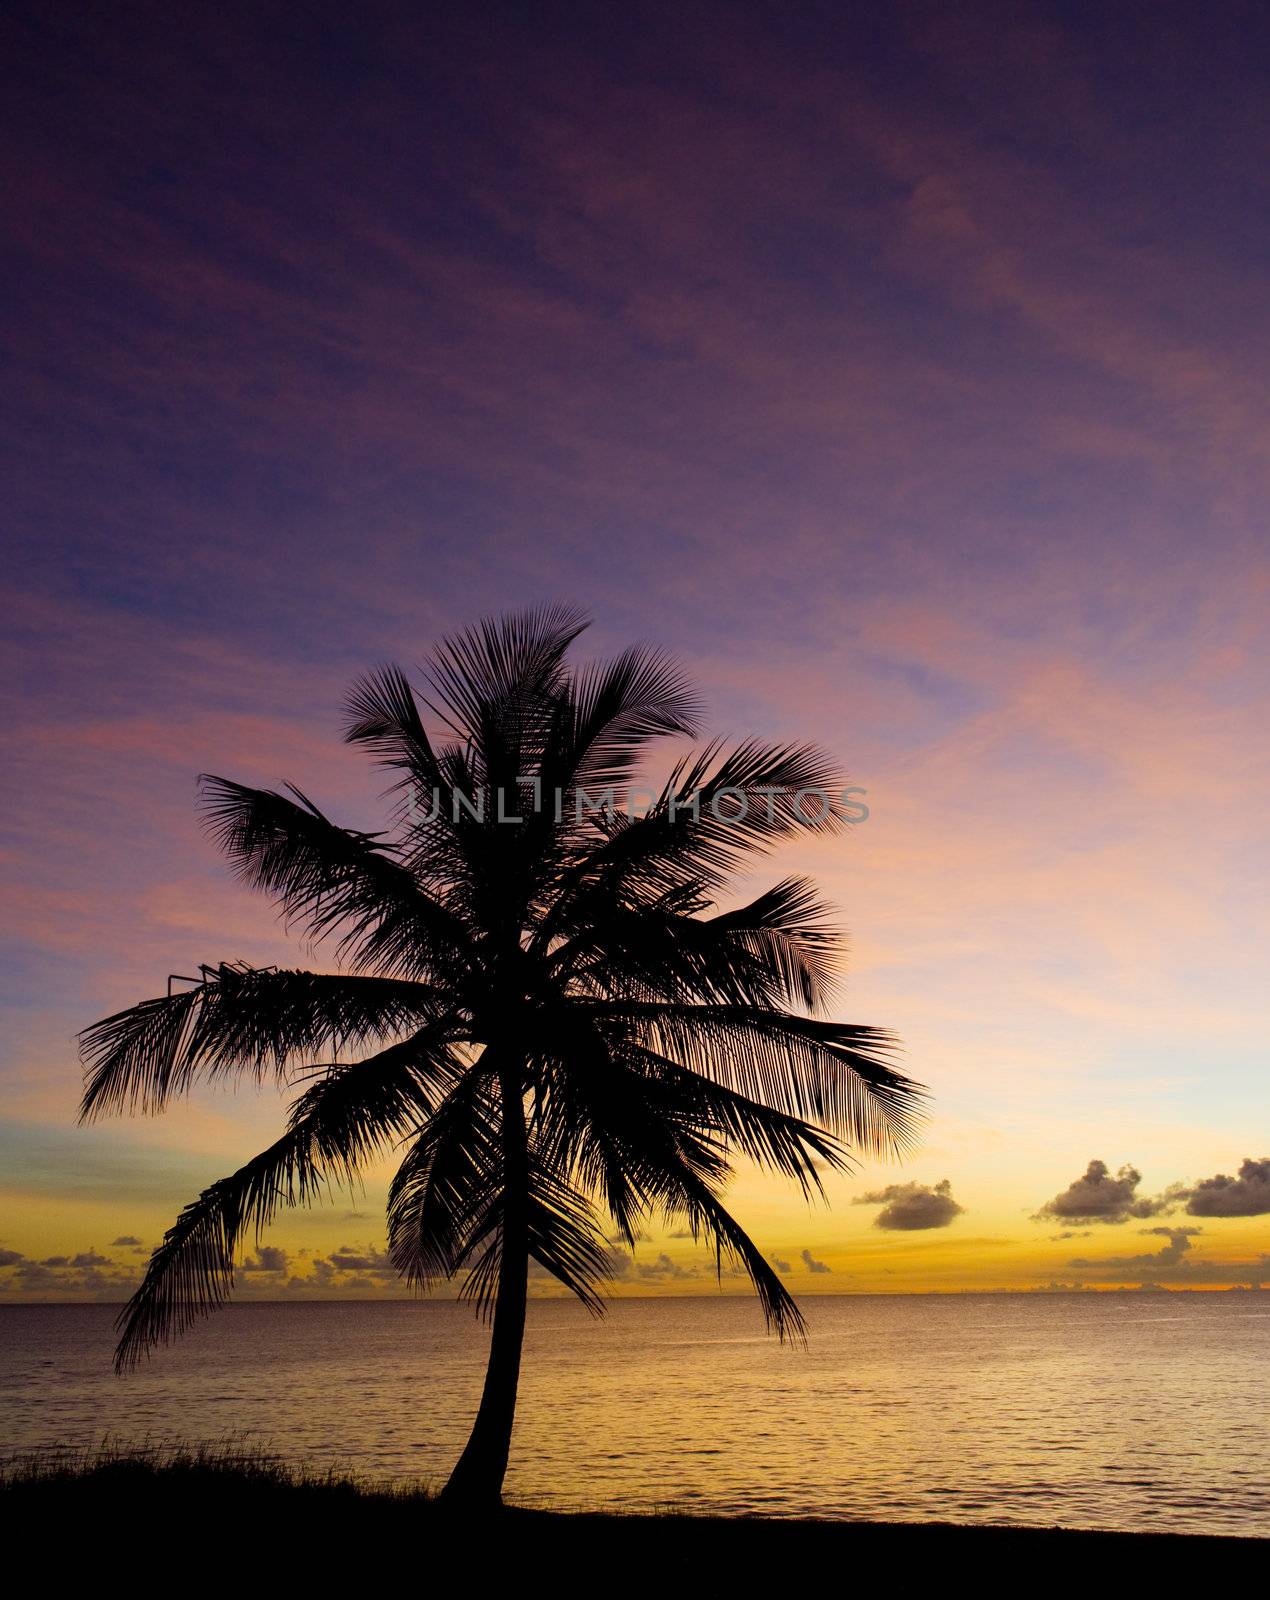 sunset over Caribbean Sea, Barbados by phbcz